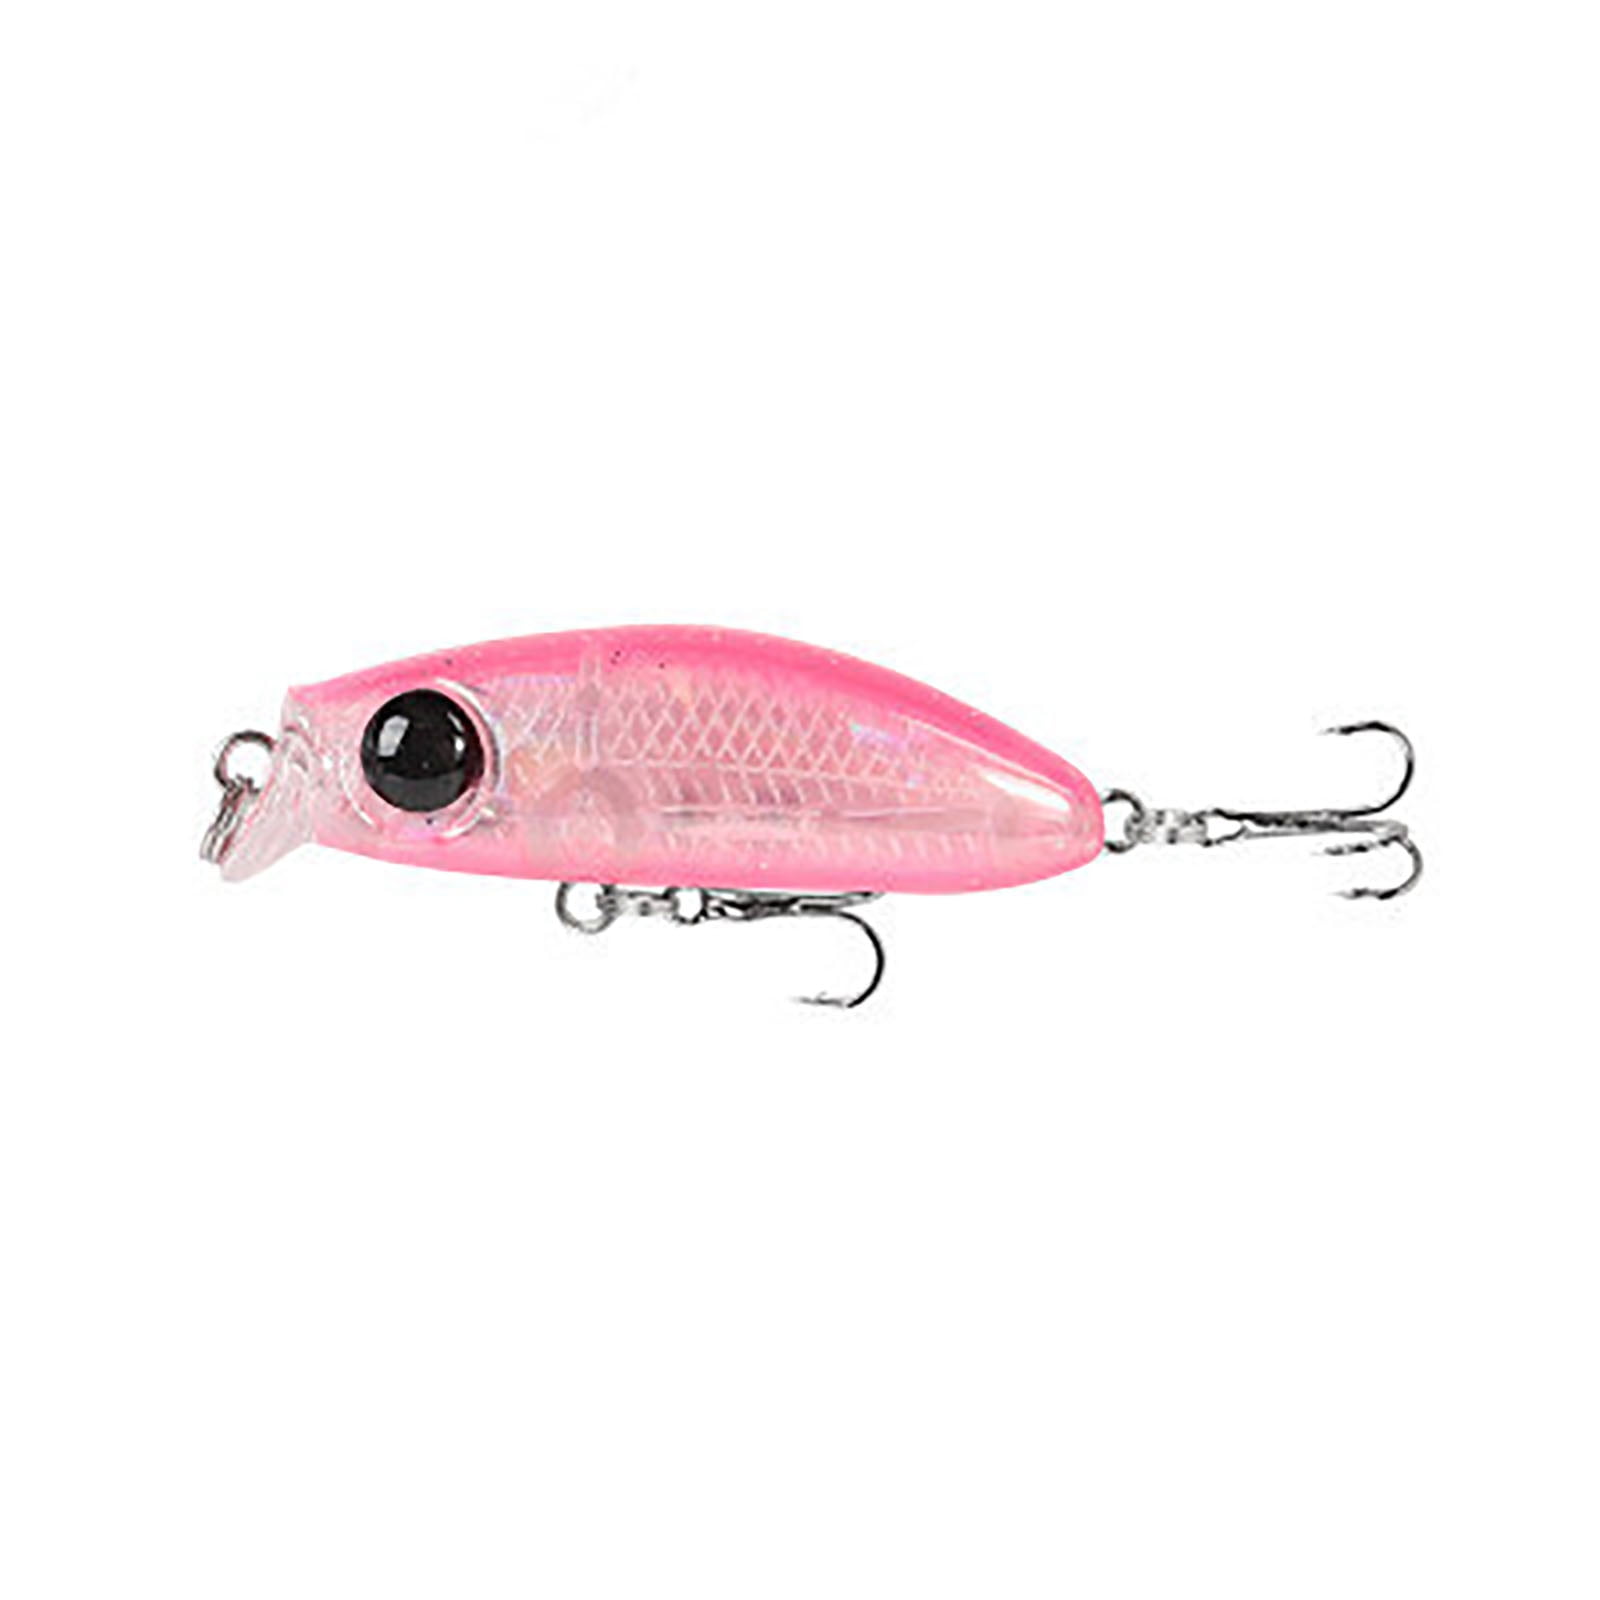 2.5g/35mm Fishing Lure Slow-sinking Mini Micro Minnow 3d Eyes Artificial  Fake Bait With 2 Powerful Treble Hooks